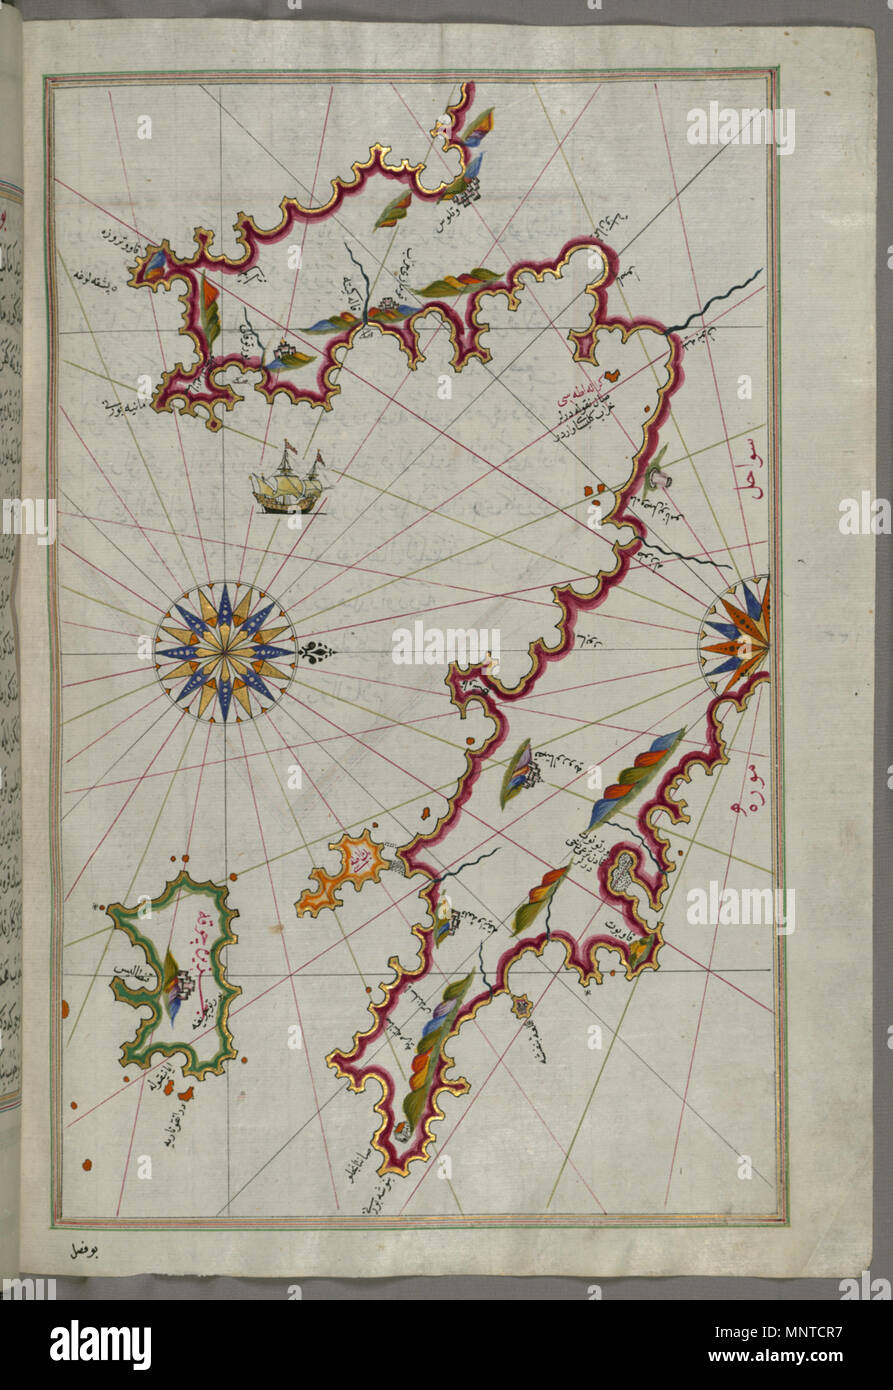 Piri Reis (Turkish, 1465-1555). 'Leaf from Book on Navigation,' 17th-18th century. ink, paint, and gold on paper. Walters Art Museum (W.658.127B): Acquired by Henry Walters. W.658.127b 1004 Piri Reis - Map of the Peloponnese Peninsula with the Island of Kythira and the Lakonikos Bay - Walters W658127B - Full Page Stock Photo